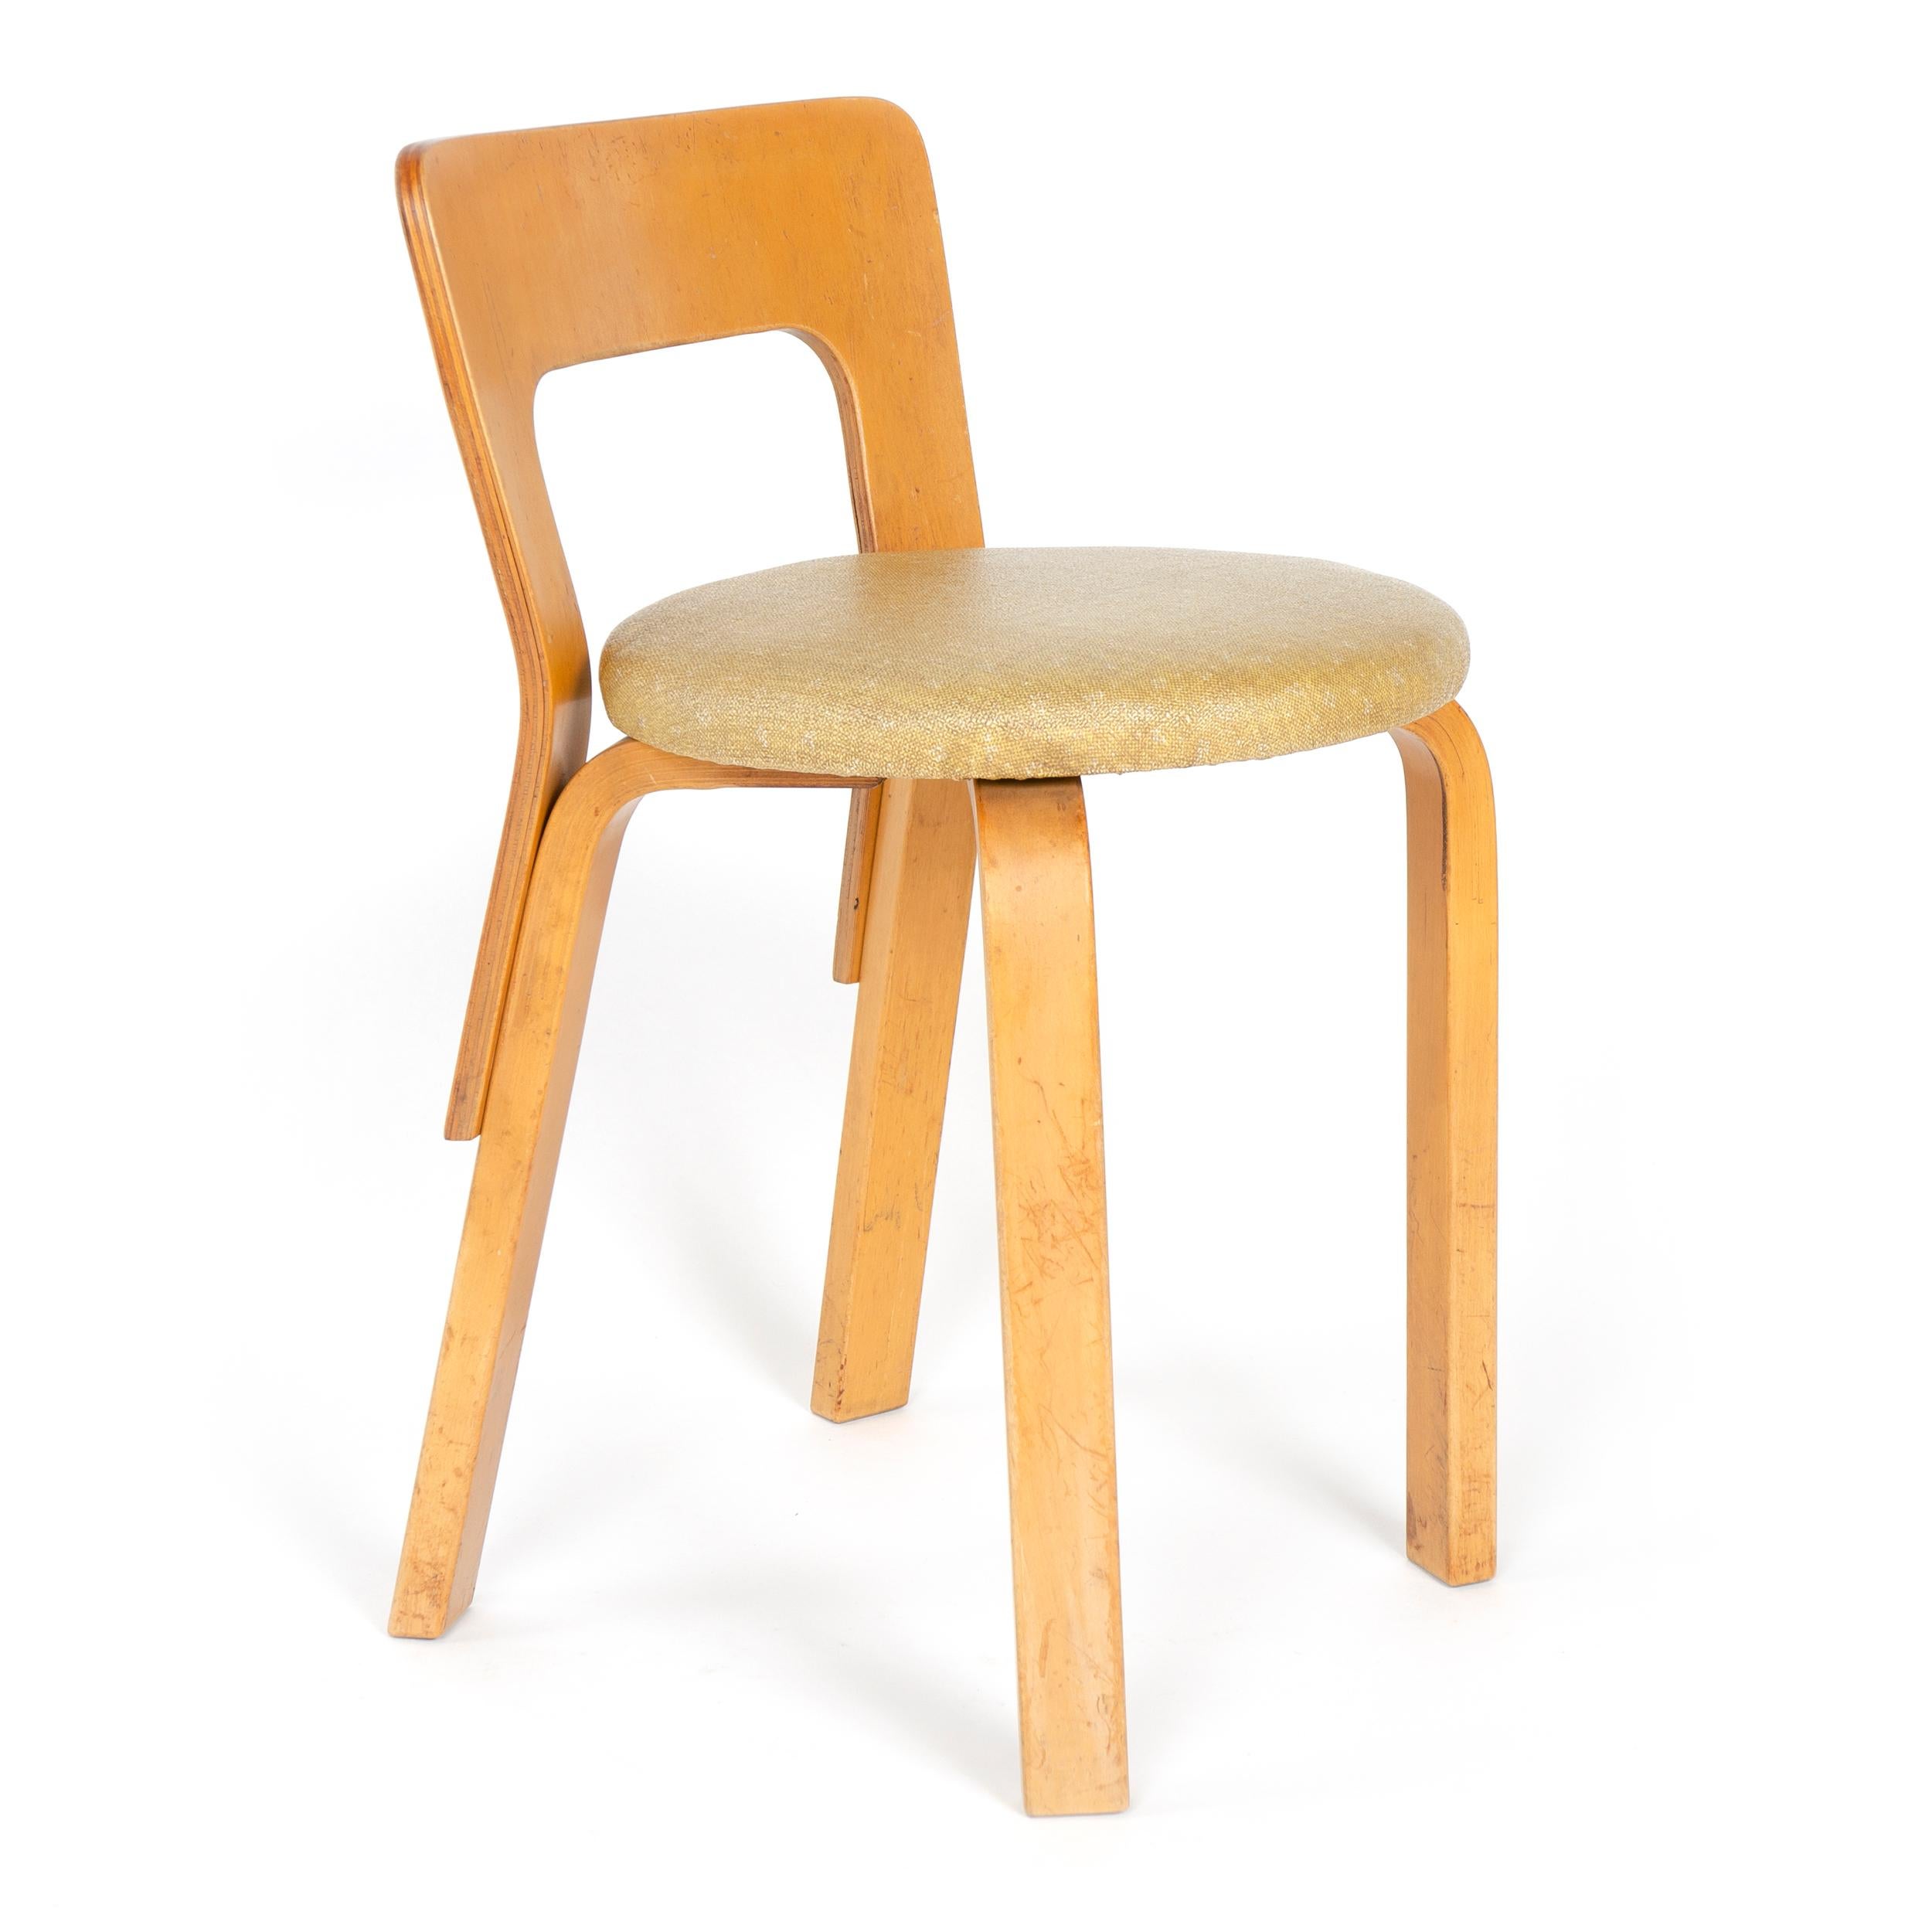 A post WWII edition of a 1935 Aalto design, model No.65, of molded and bent laminated Baltic birch. This particular low back side chair being a ‘rounded front’ version with upholstered seat. Legs have the Aalto inset splines at the bend of the legs.